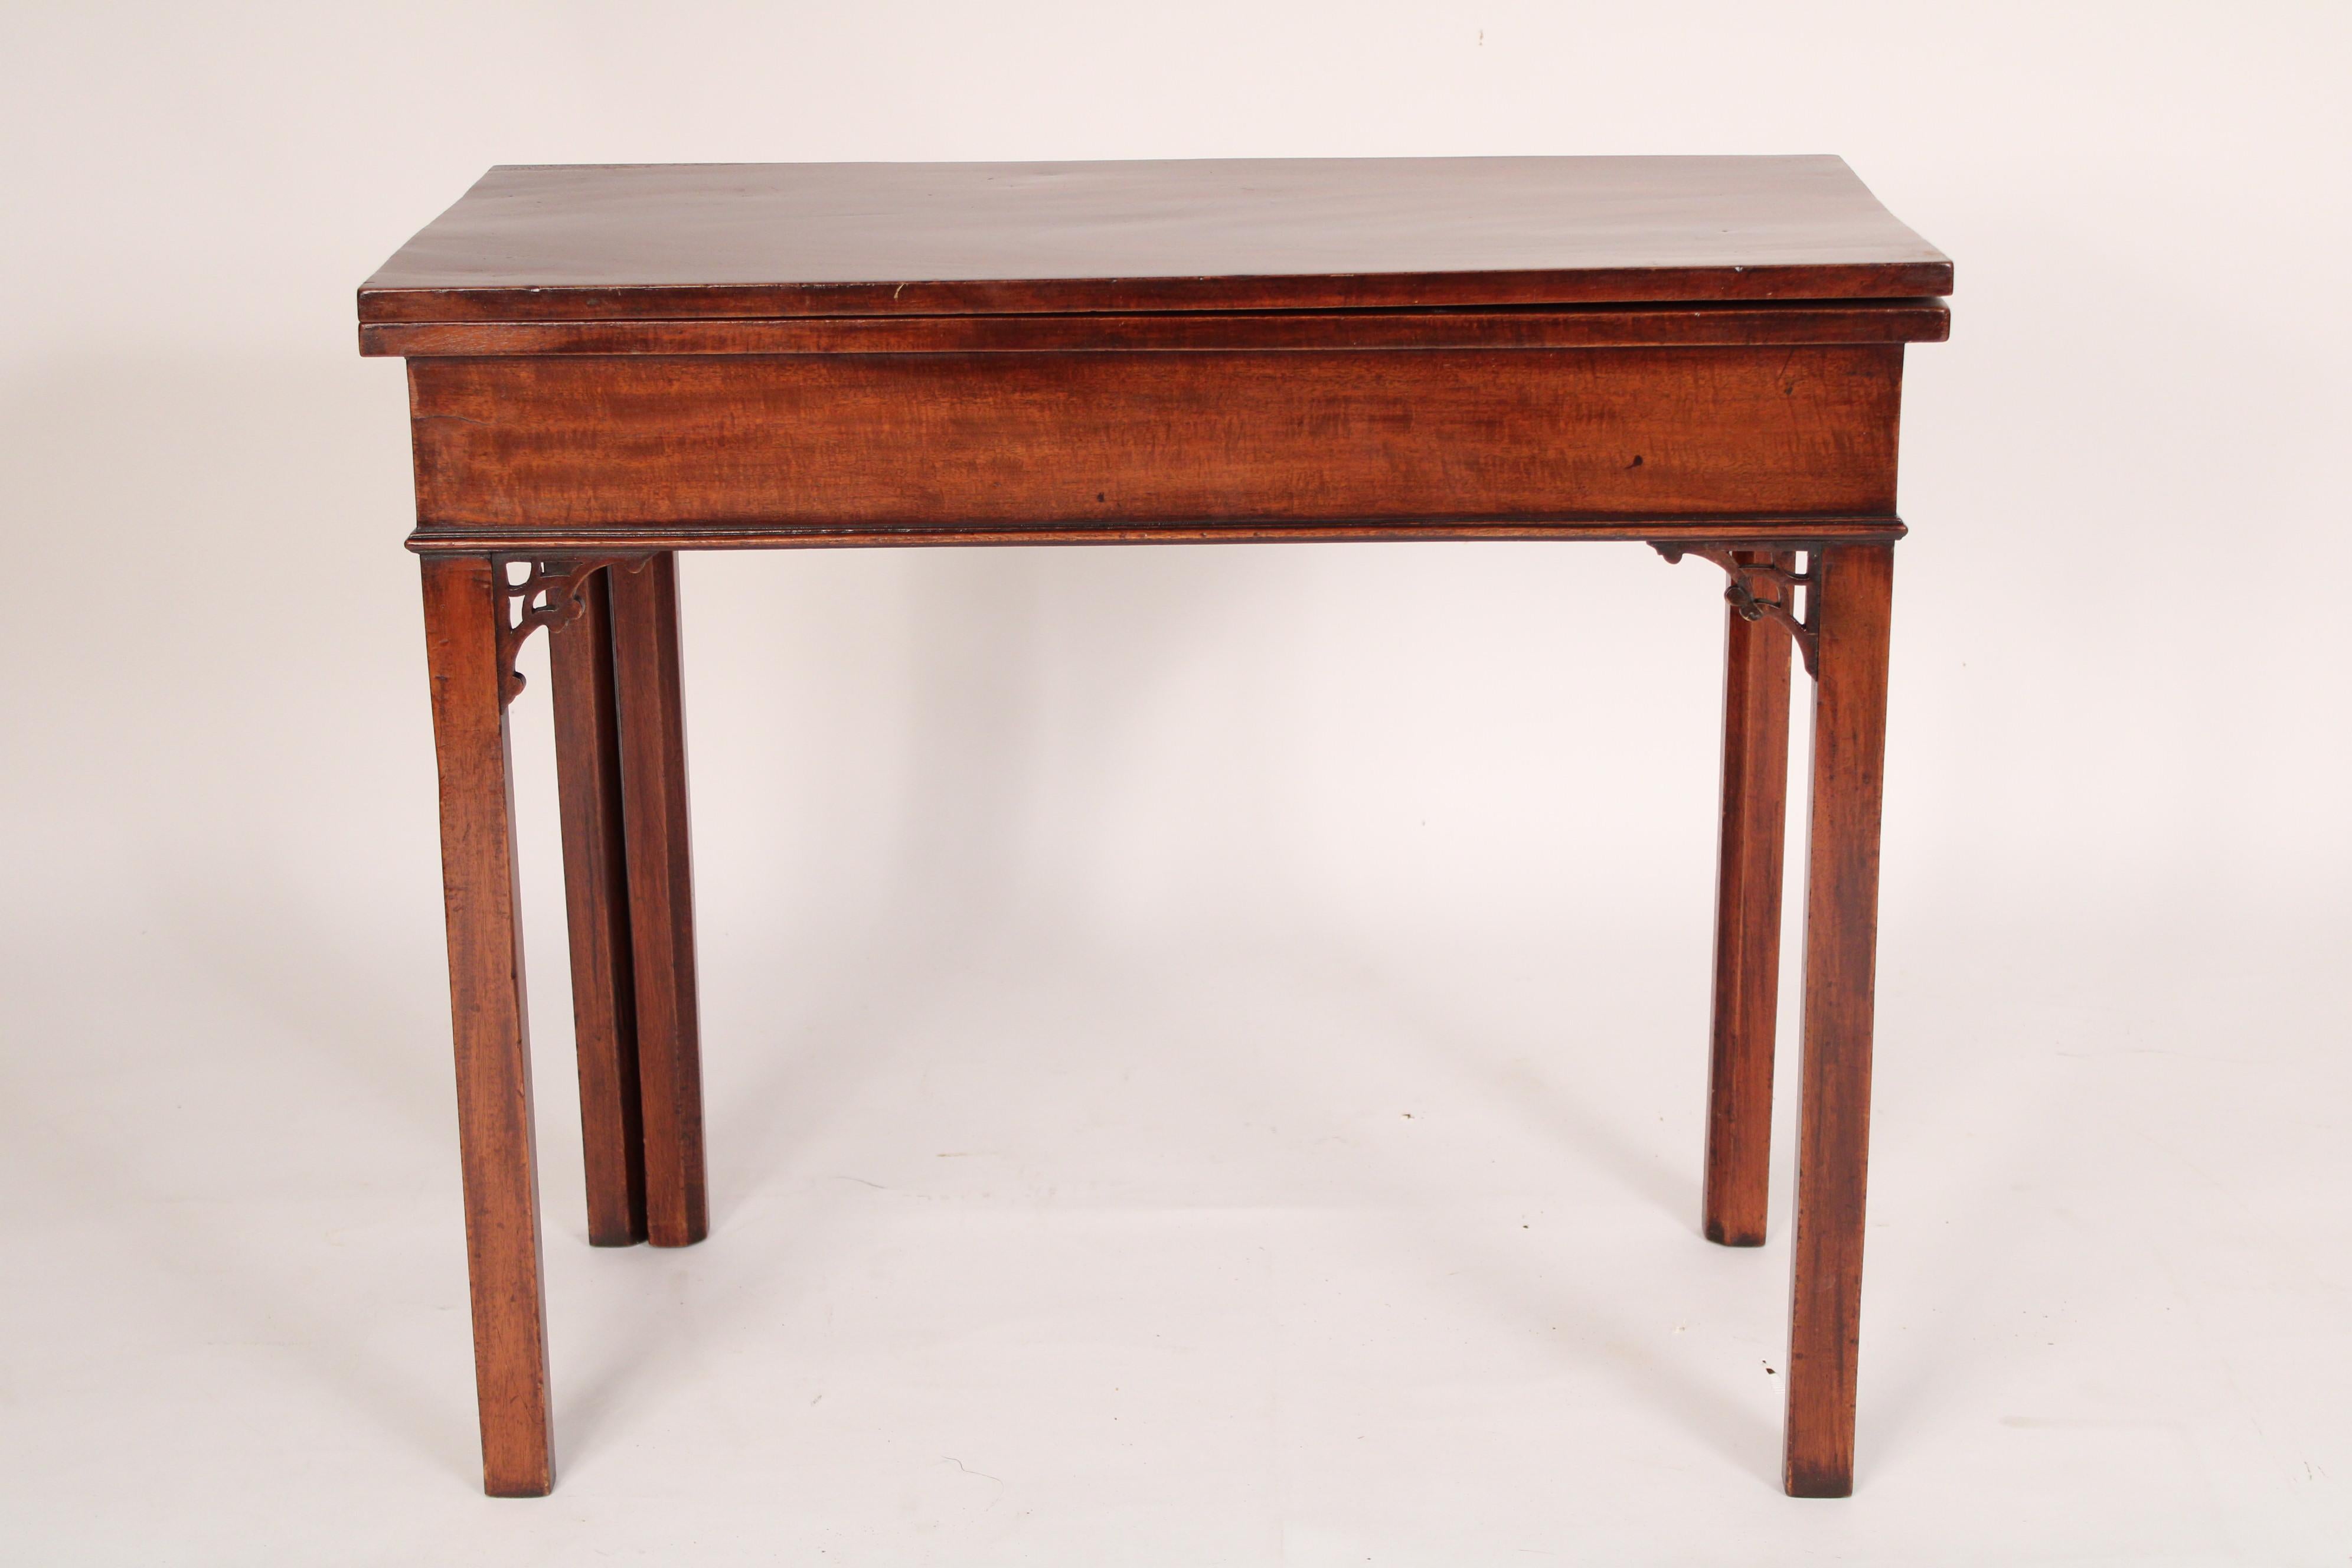 Chinese Chippendale style mahogany games table, 19th century. With an overhanging fold over crotch mahogany rectangular top, a plumb pudding mahogany frieze, Chinese Chippendale style corner brackets, resting on 5, 5 sided legs. When opened the top